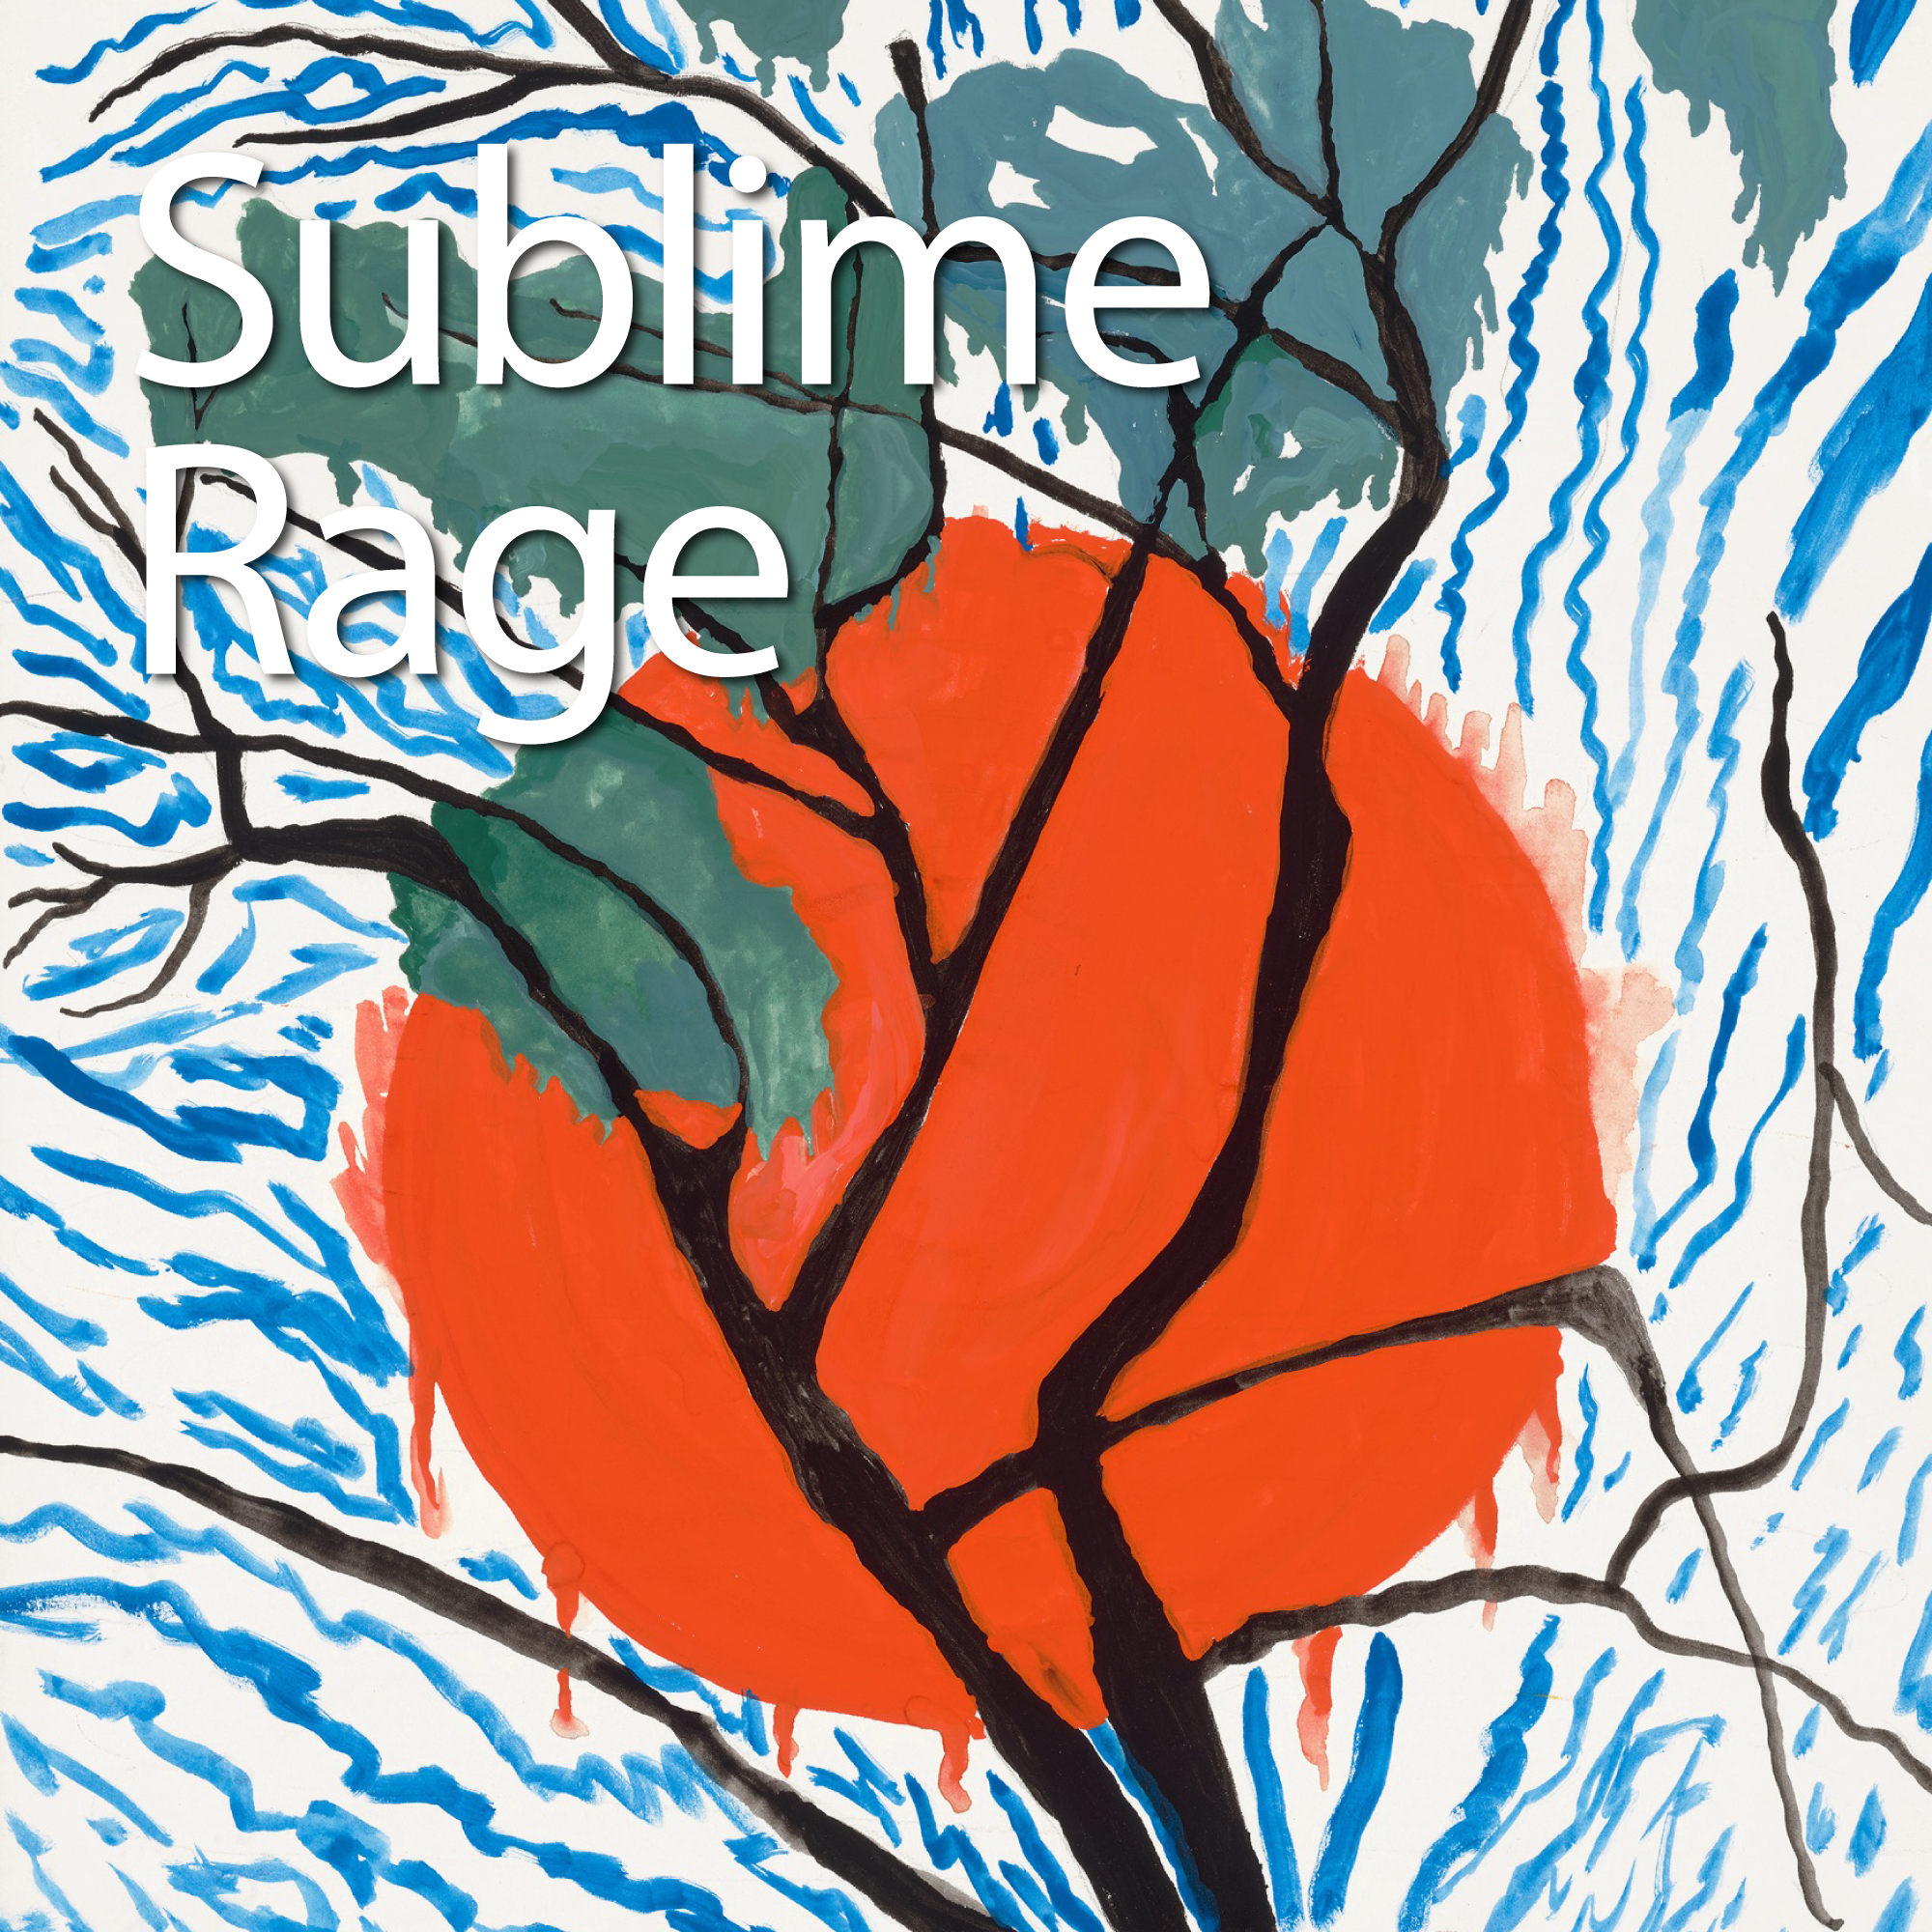 Sublime Rage gallery